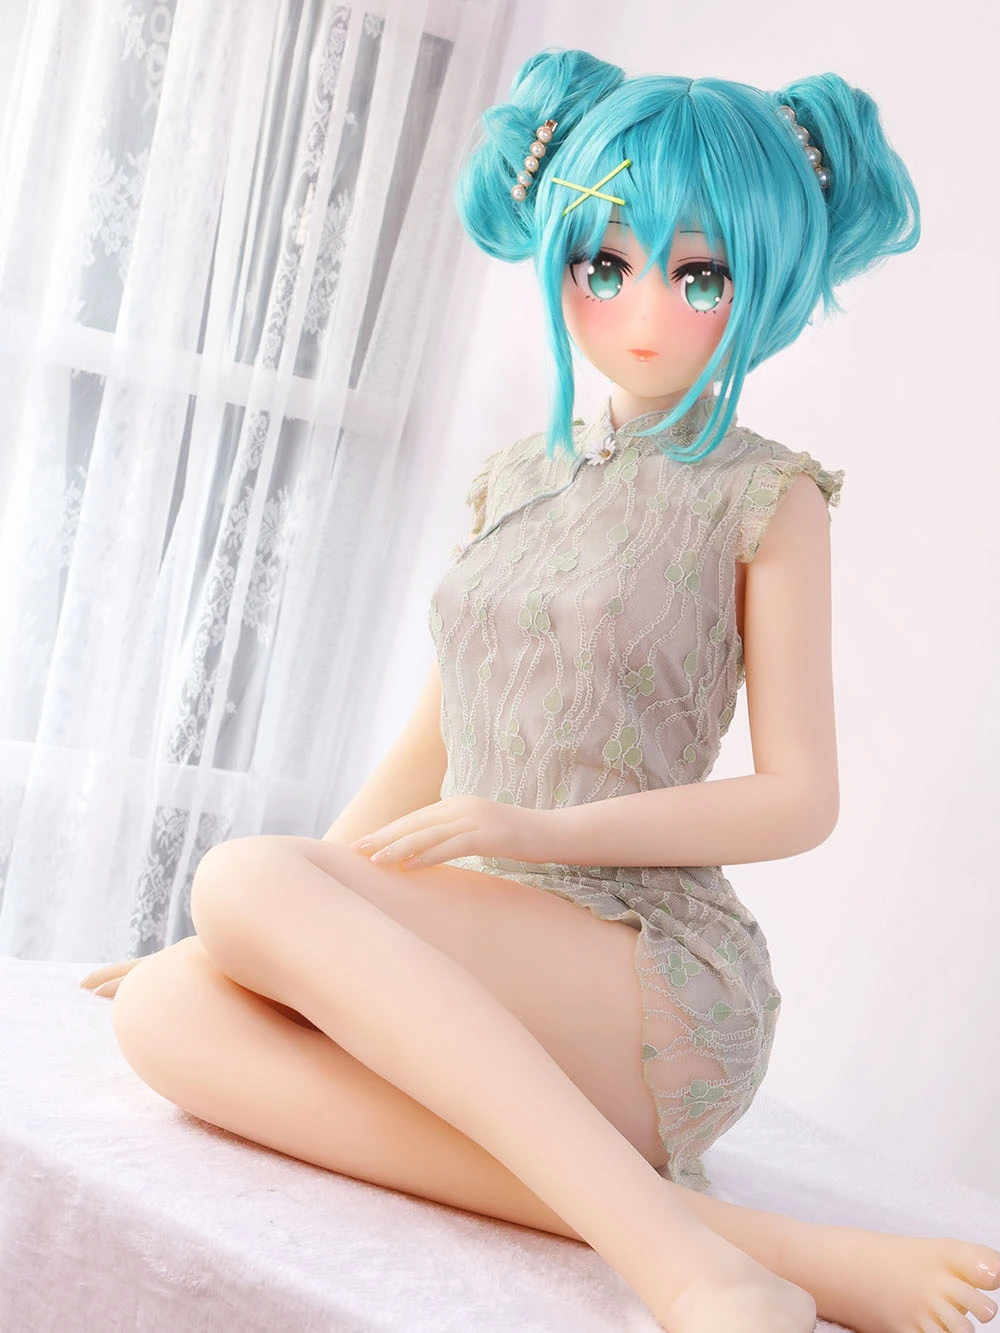 hatsune miku doll From Aotume